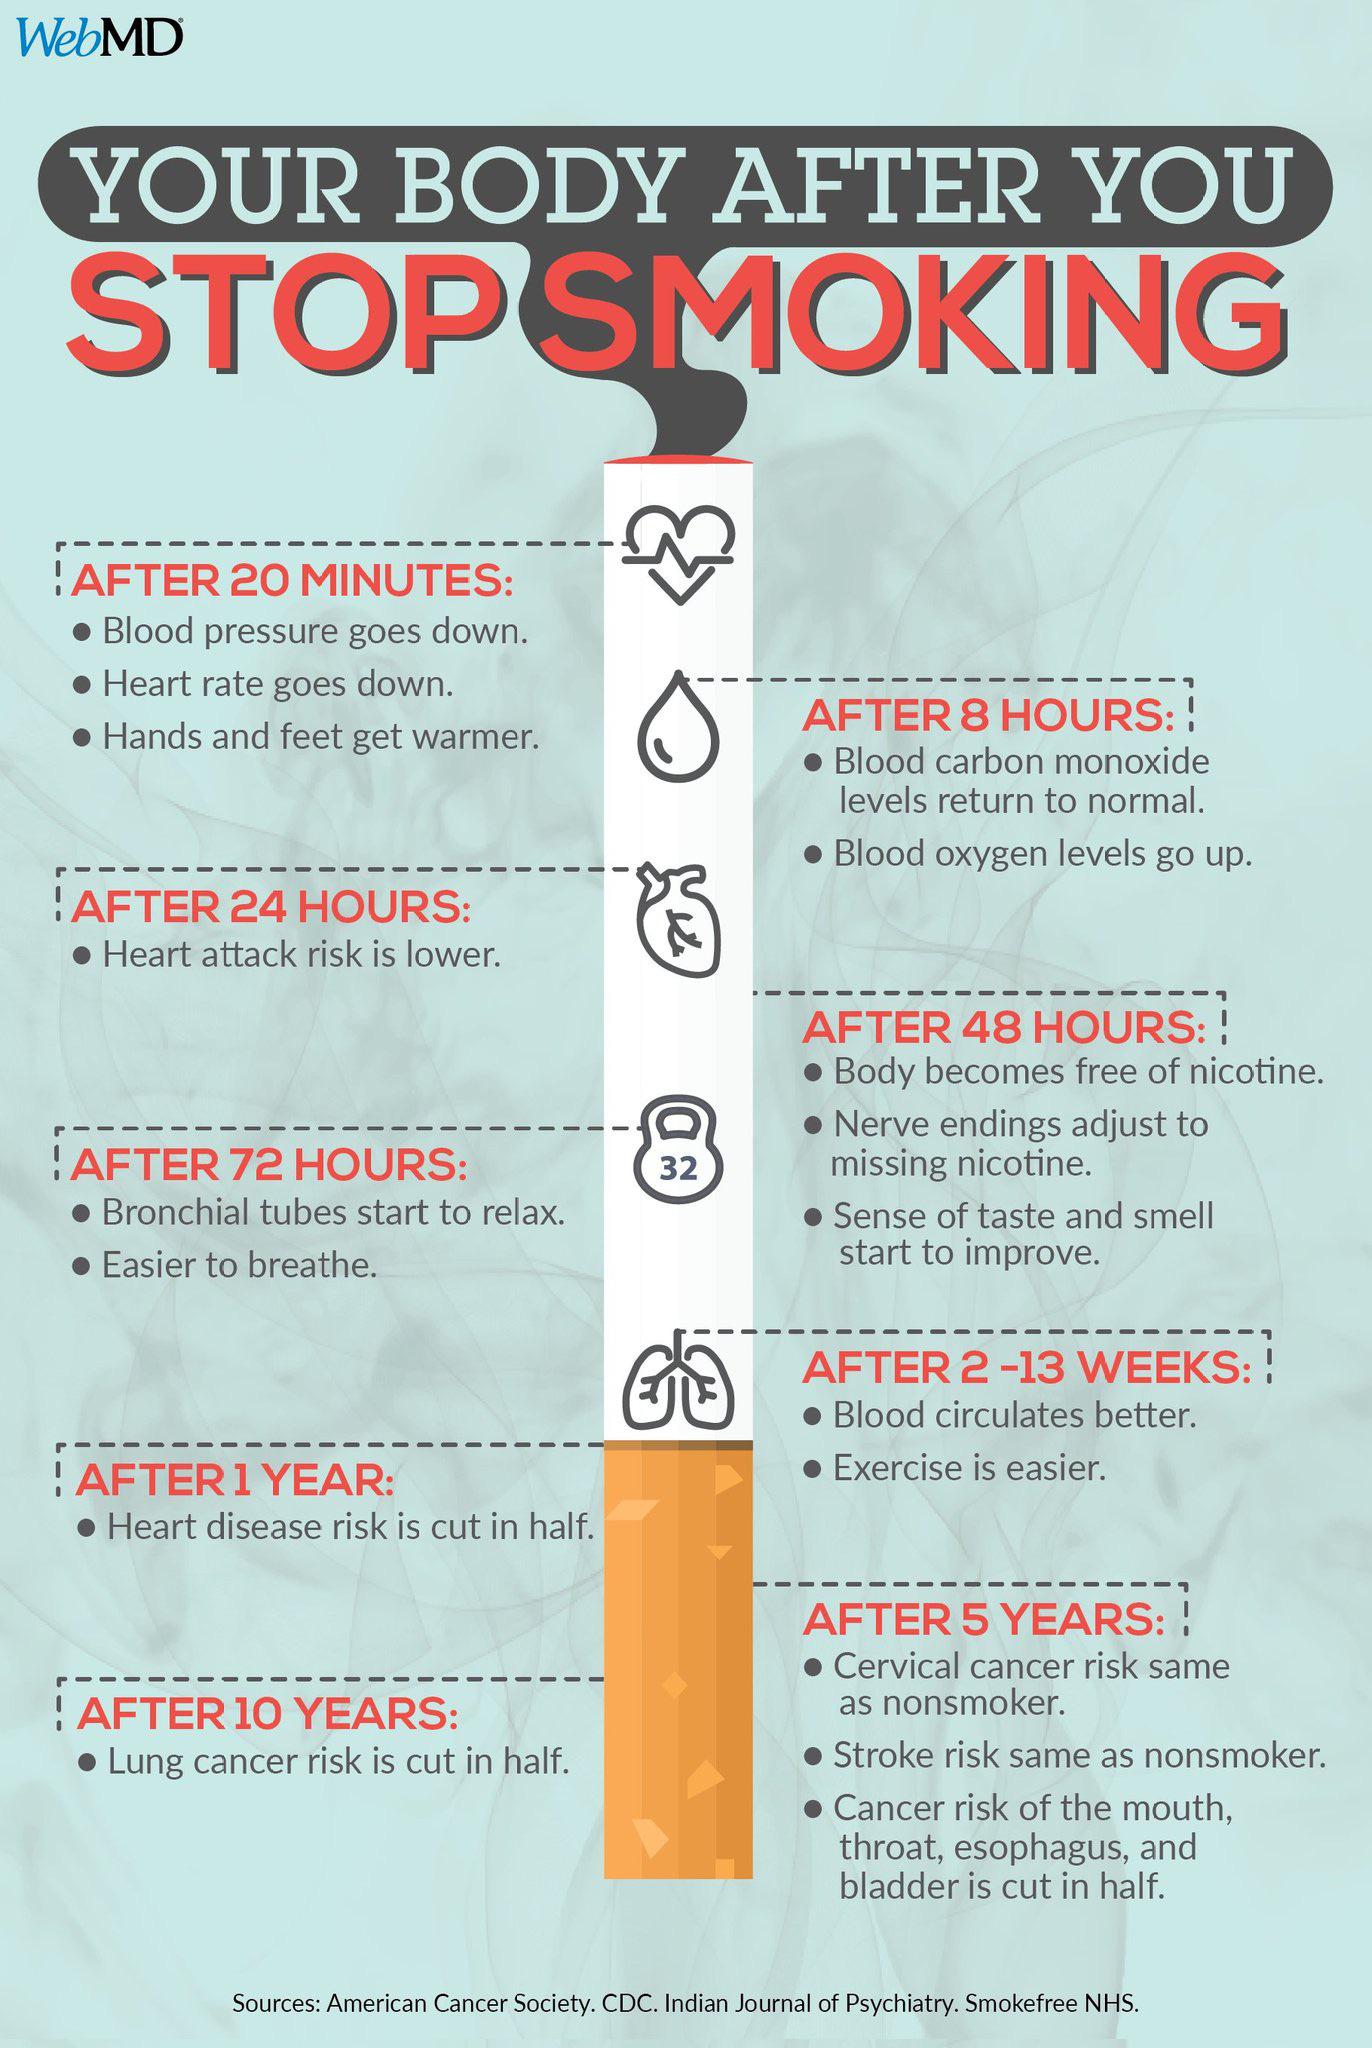 infographics and charts - your body after you stop smoking - WebMD Your Body After You Stop Smoking After 20 Minutes Blood pressure goes down. Heart rate goes down. Hands and feet get warmer. After 24 Hours Heart attack risk is lower. ! After 72 Hours Bro